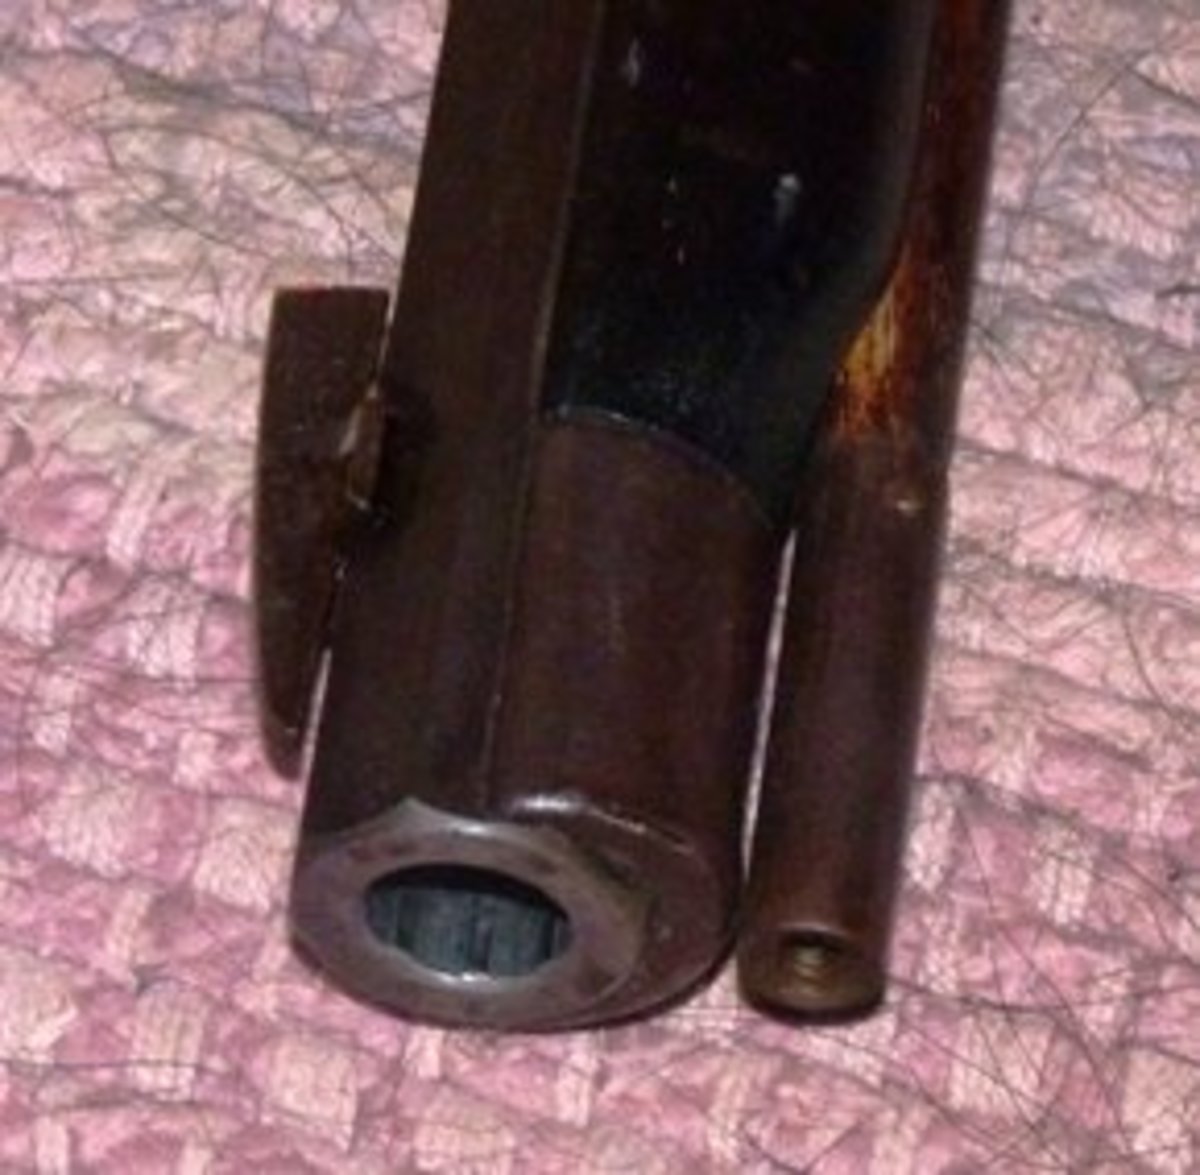 ramrod tip/front sight and nose cap